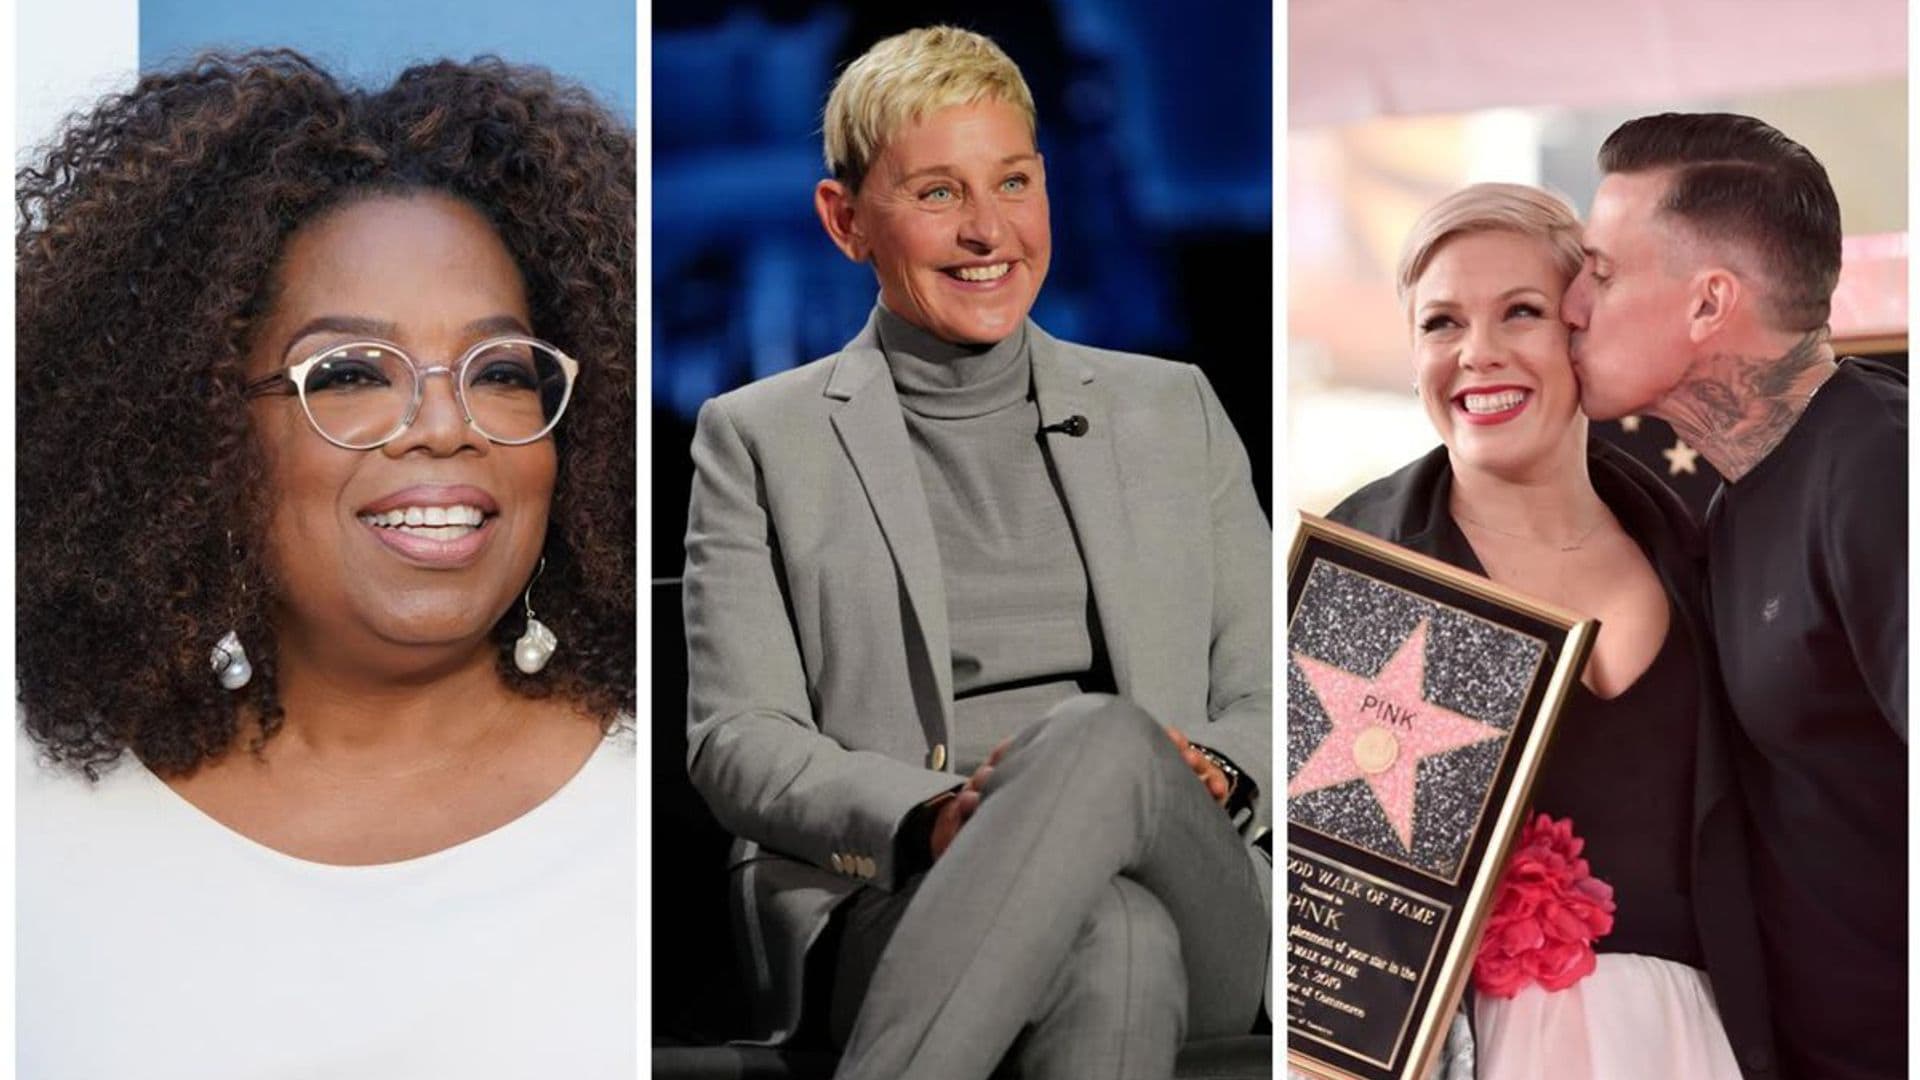 Oprah Winfrey and Pink support Ellen DeGeneres on her decision to end her show